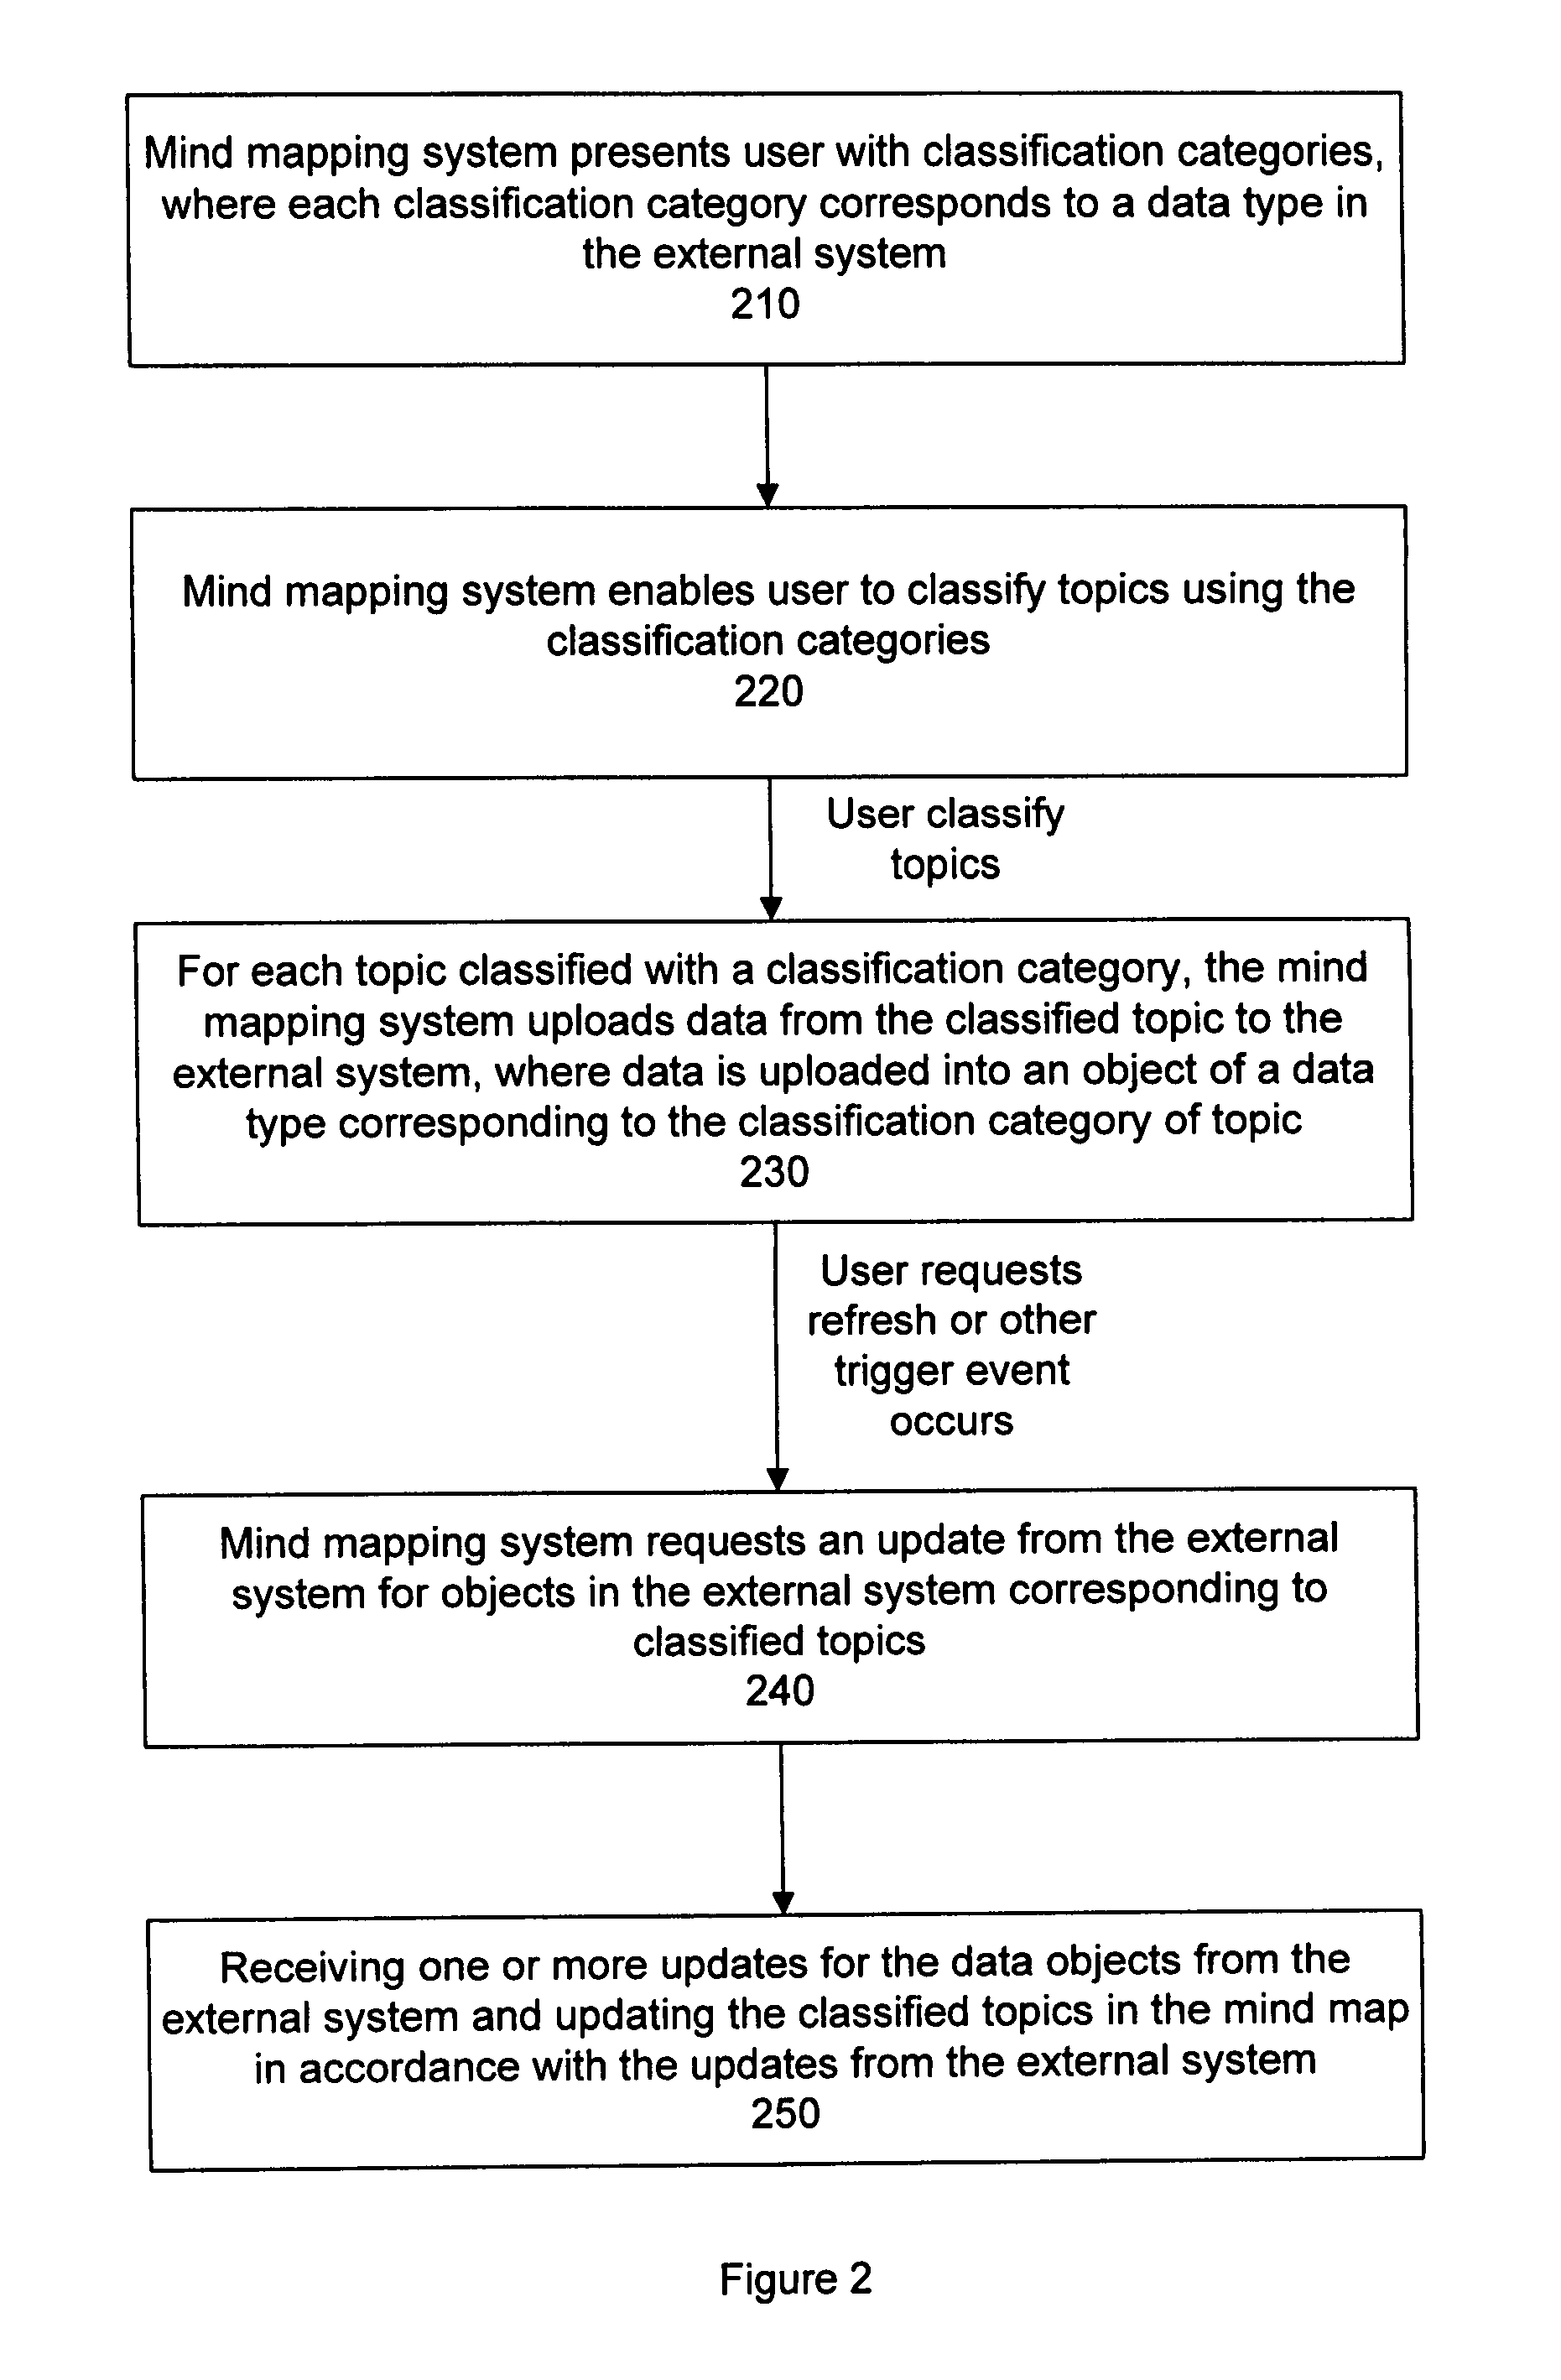 Method for creating and tracking external system data via a mind map